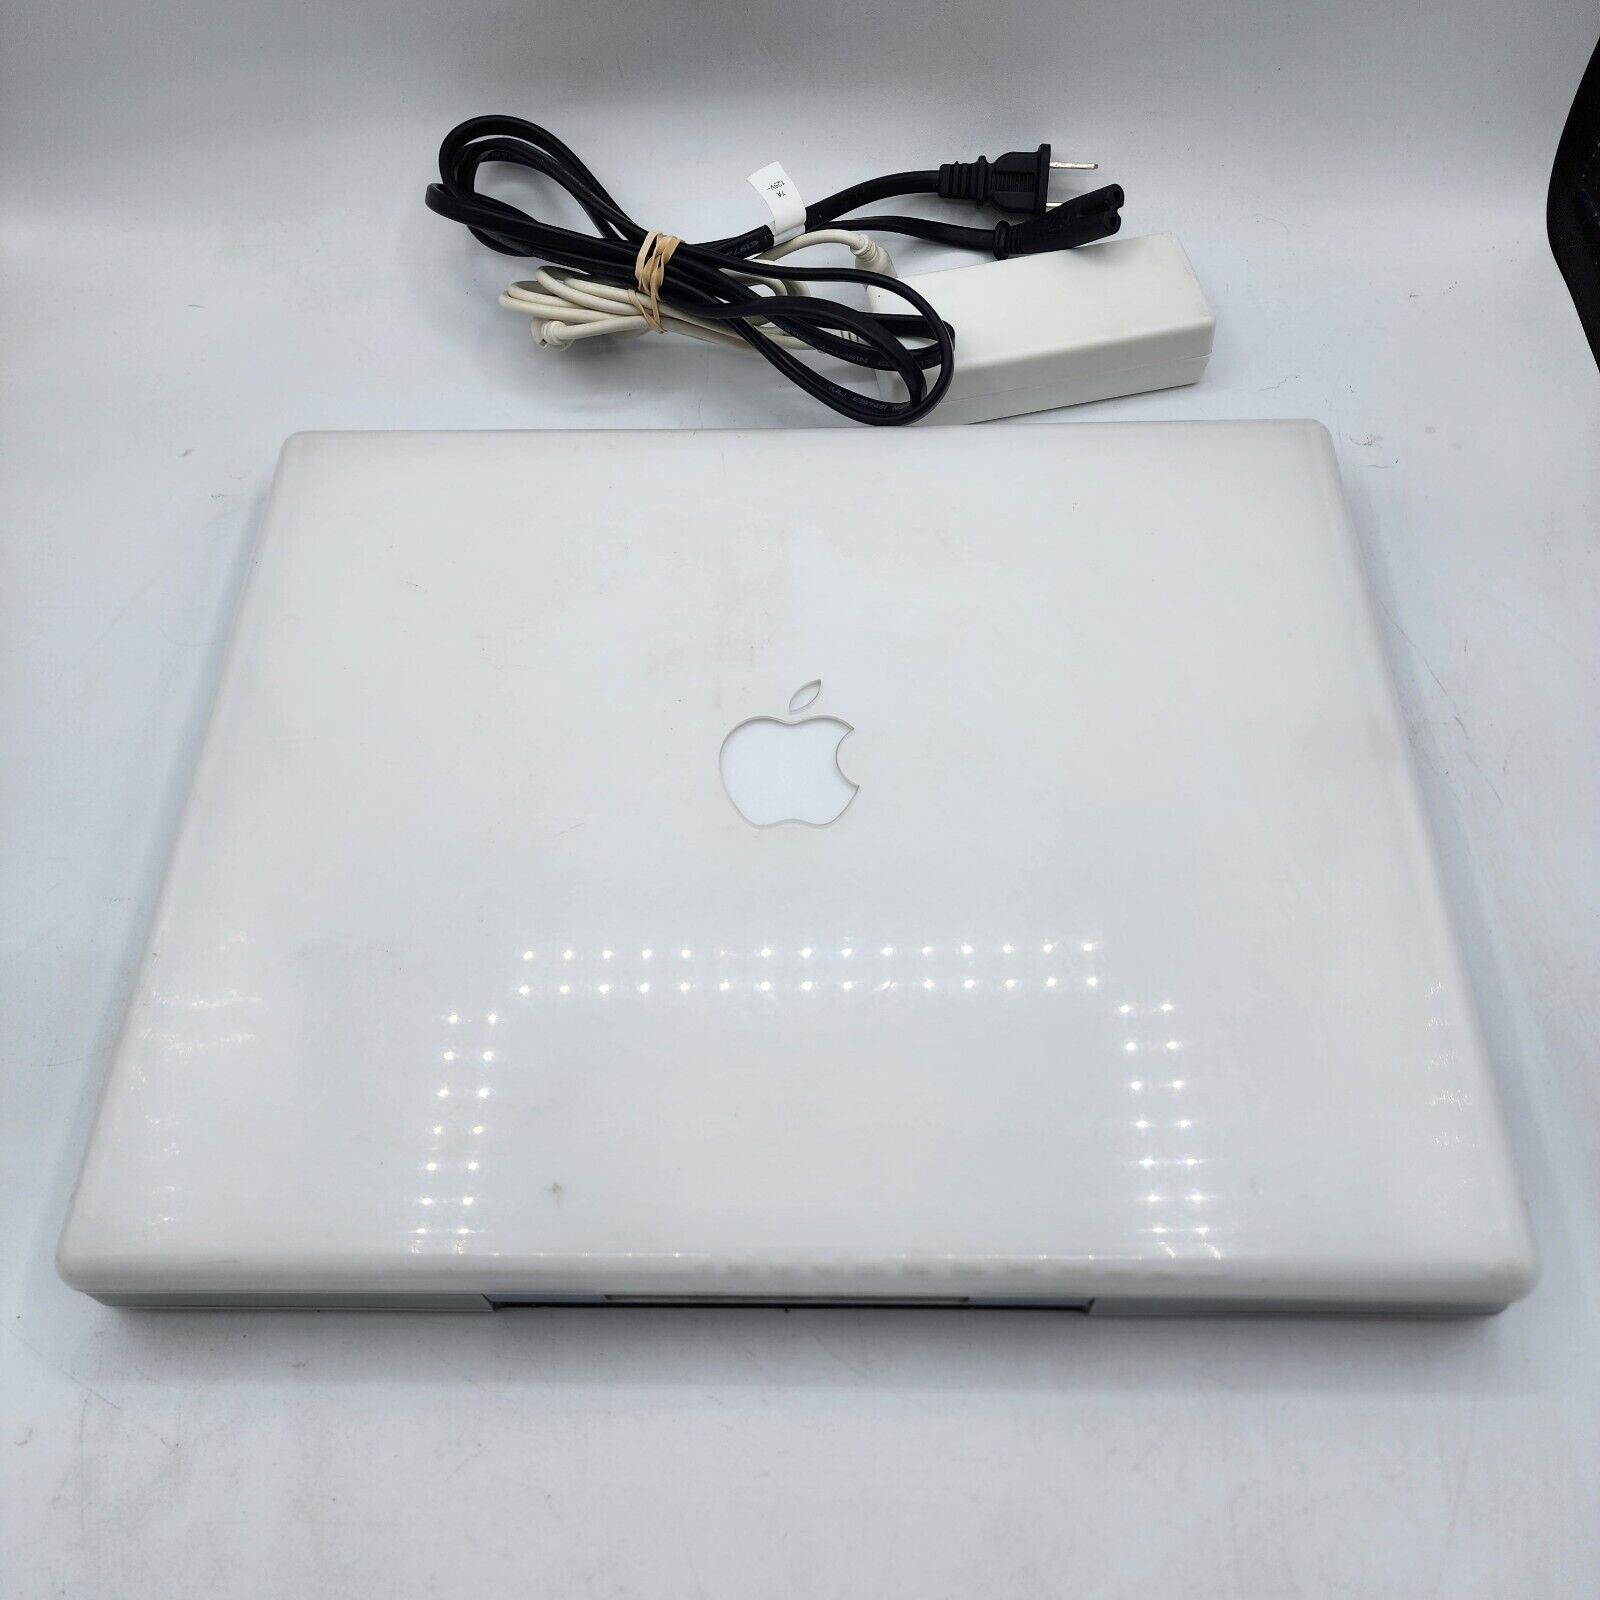 Apple iBook A1007 PC Laptop Parts or Repair Powers On Black Screen Boot Noise